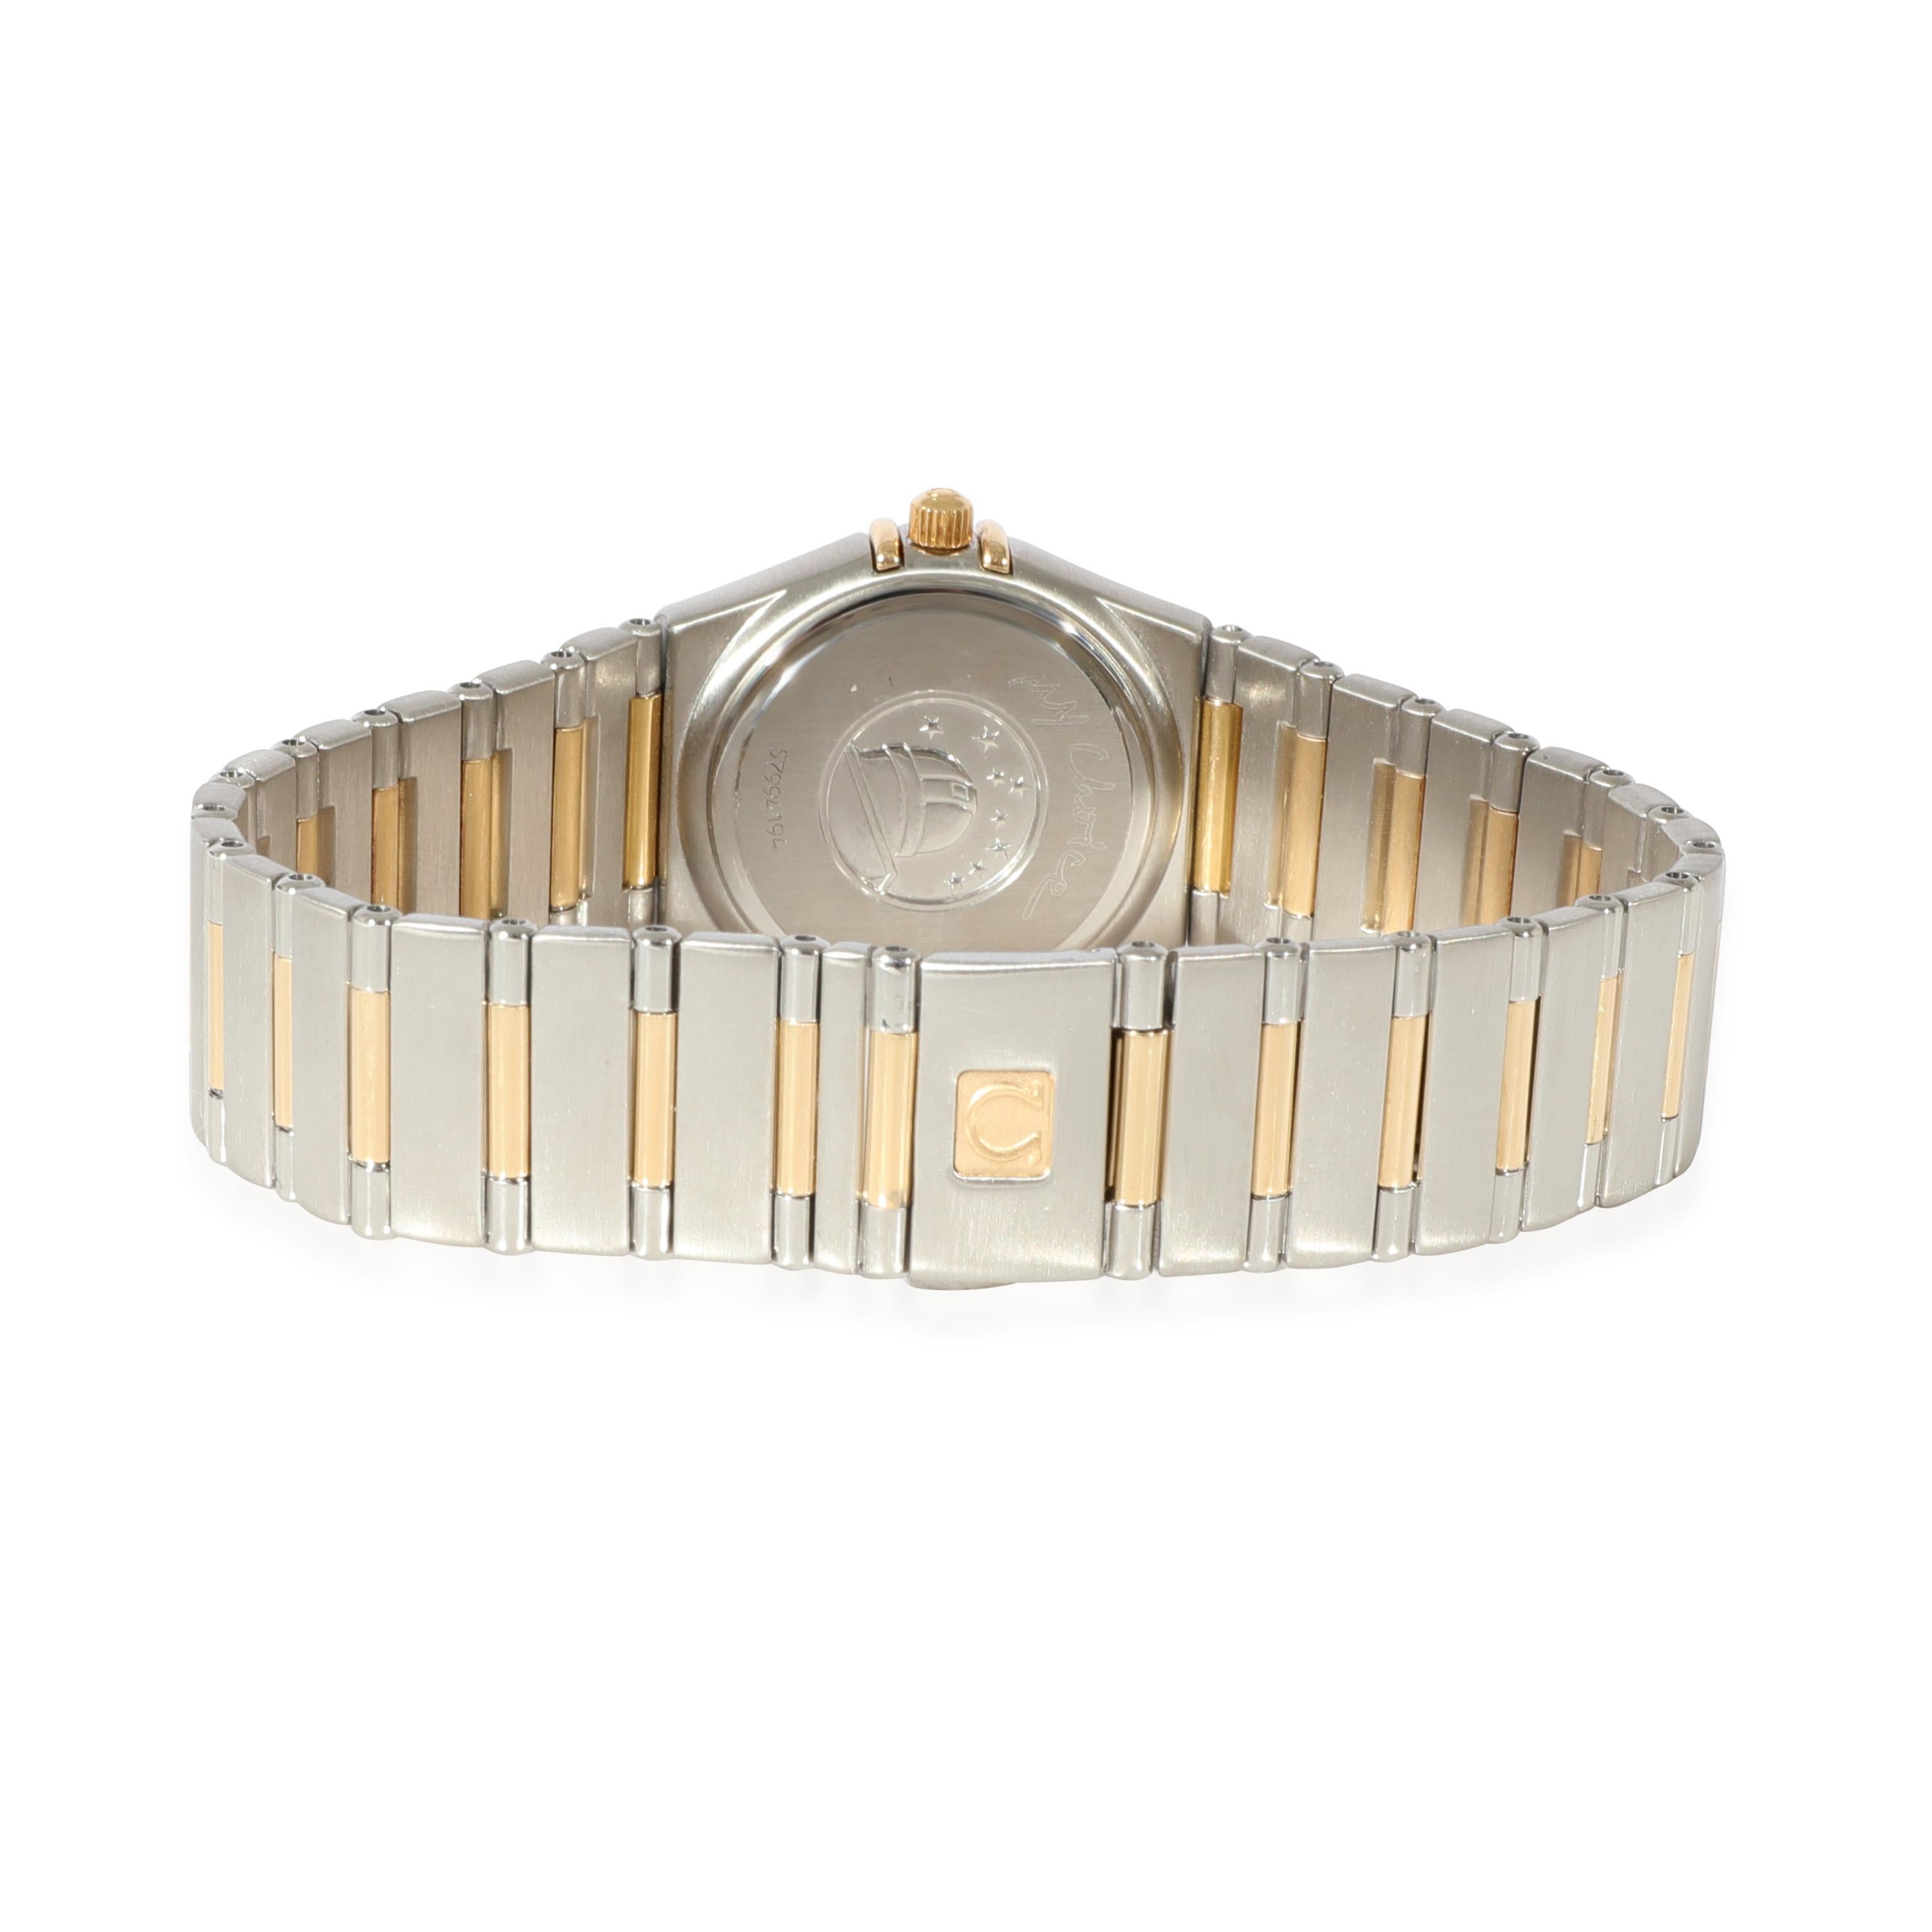 Omega Constellation 1376.75.00 Women's Watch in 18kt Stainless Steel/Yellow Gold

SKU: 122482

PRIMARY DETAILS
Brand: Omega
Model: Constellation
Country of Origin: Switzerland
Movement Type: Quartz: Battery
Year Manufactured: 2003
Year of